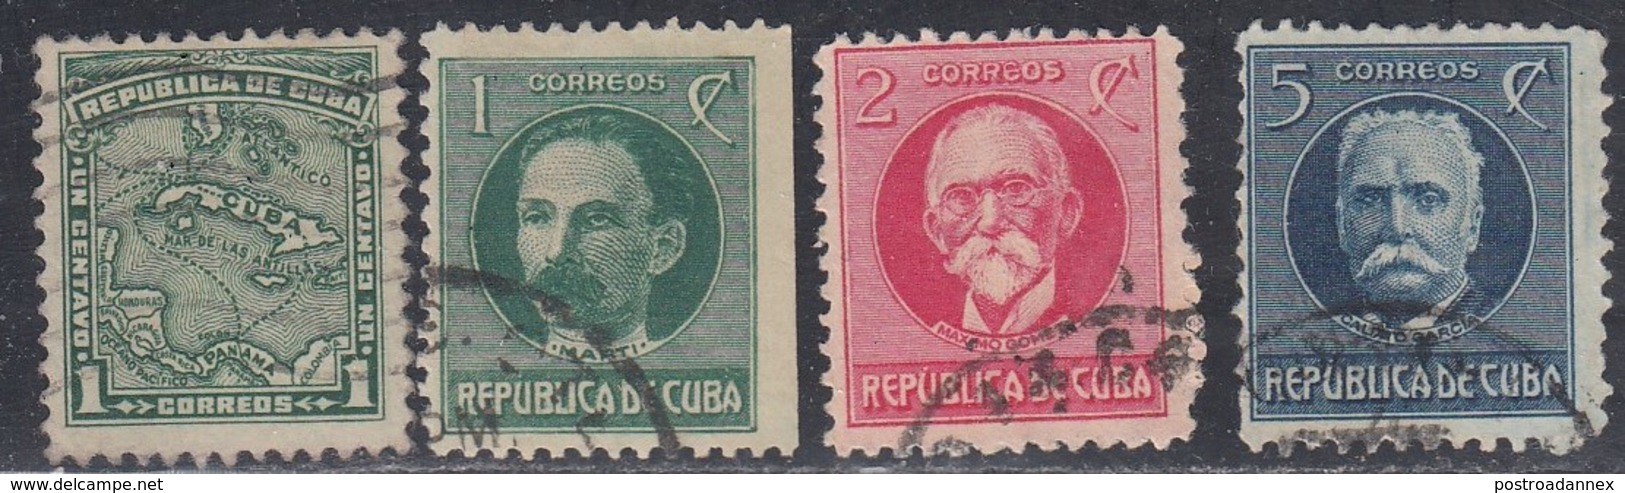 Cuba, Scott #253, 264-265, 268, Used, Map, Marti, Gomez, Garcia, Issued 1914-1917 - Used Stamps